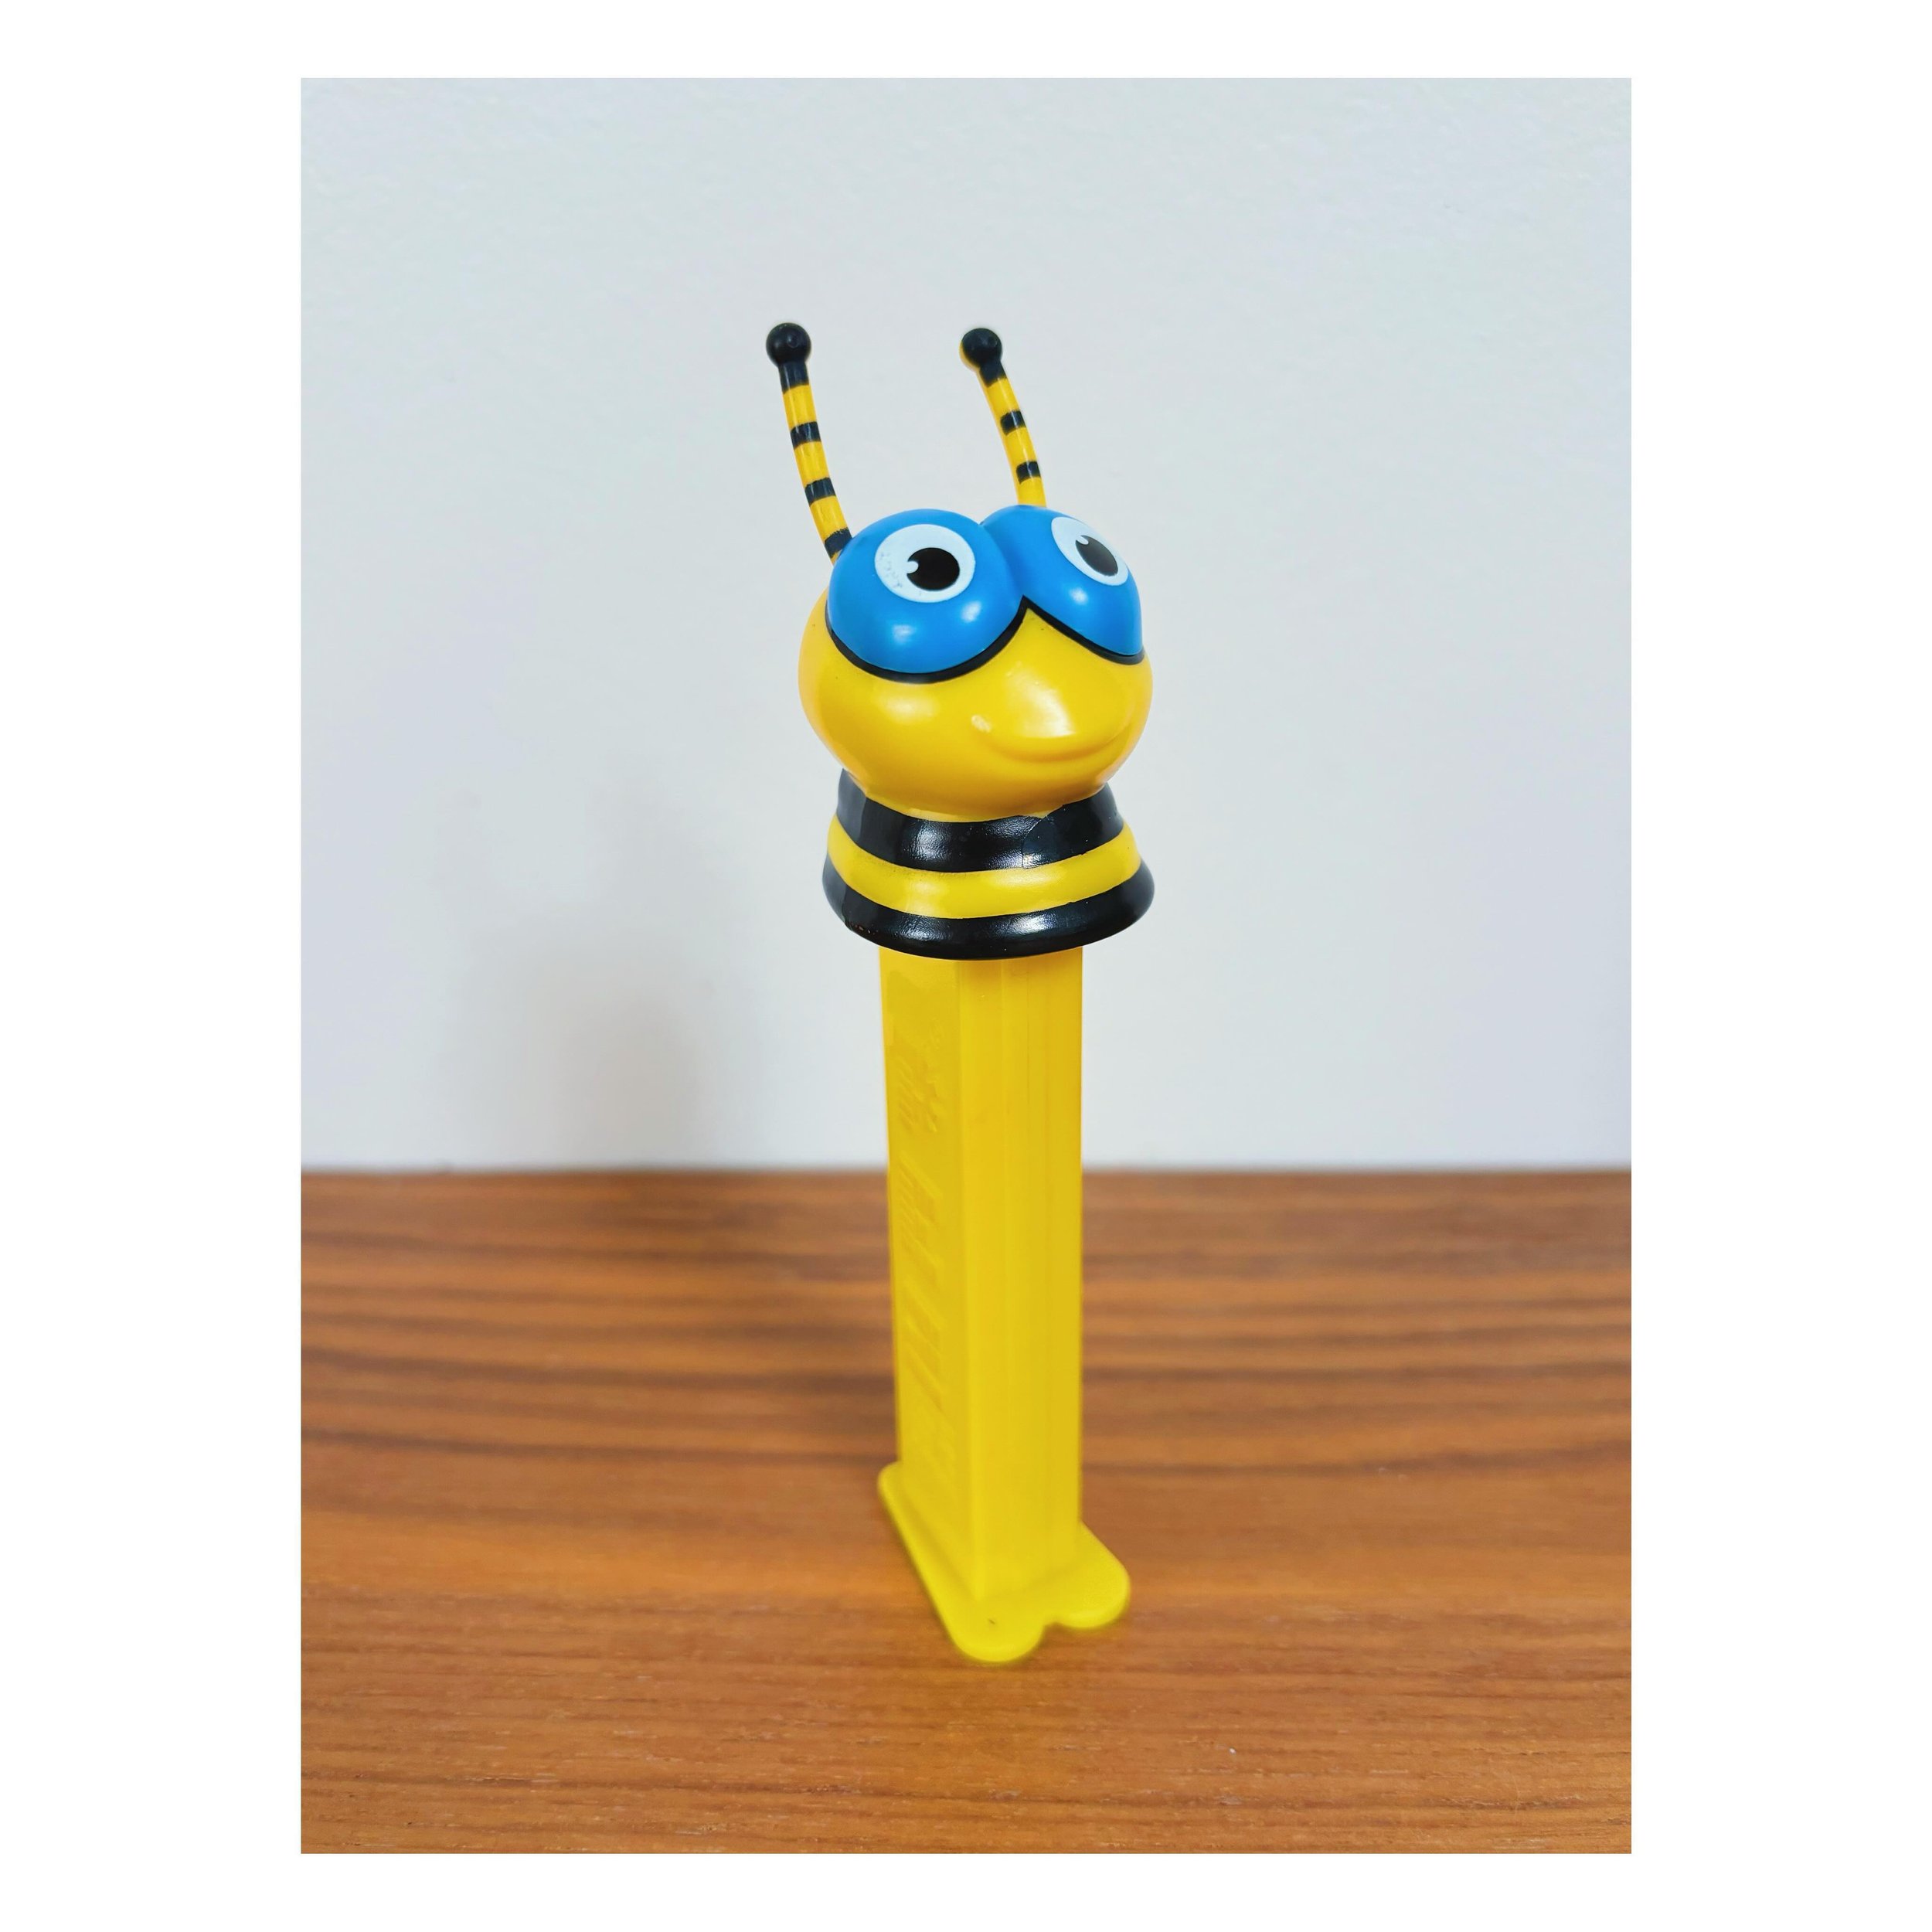 Black and gold 🐝
.
.
#pez #pezdispenser #candy #bee